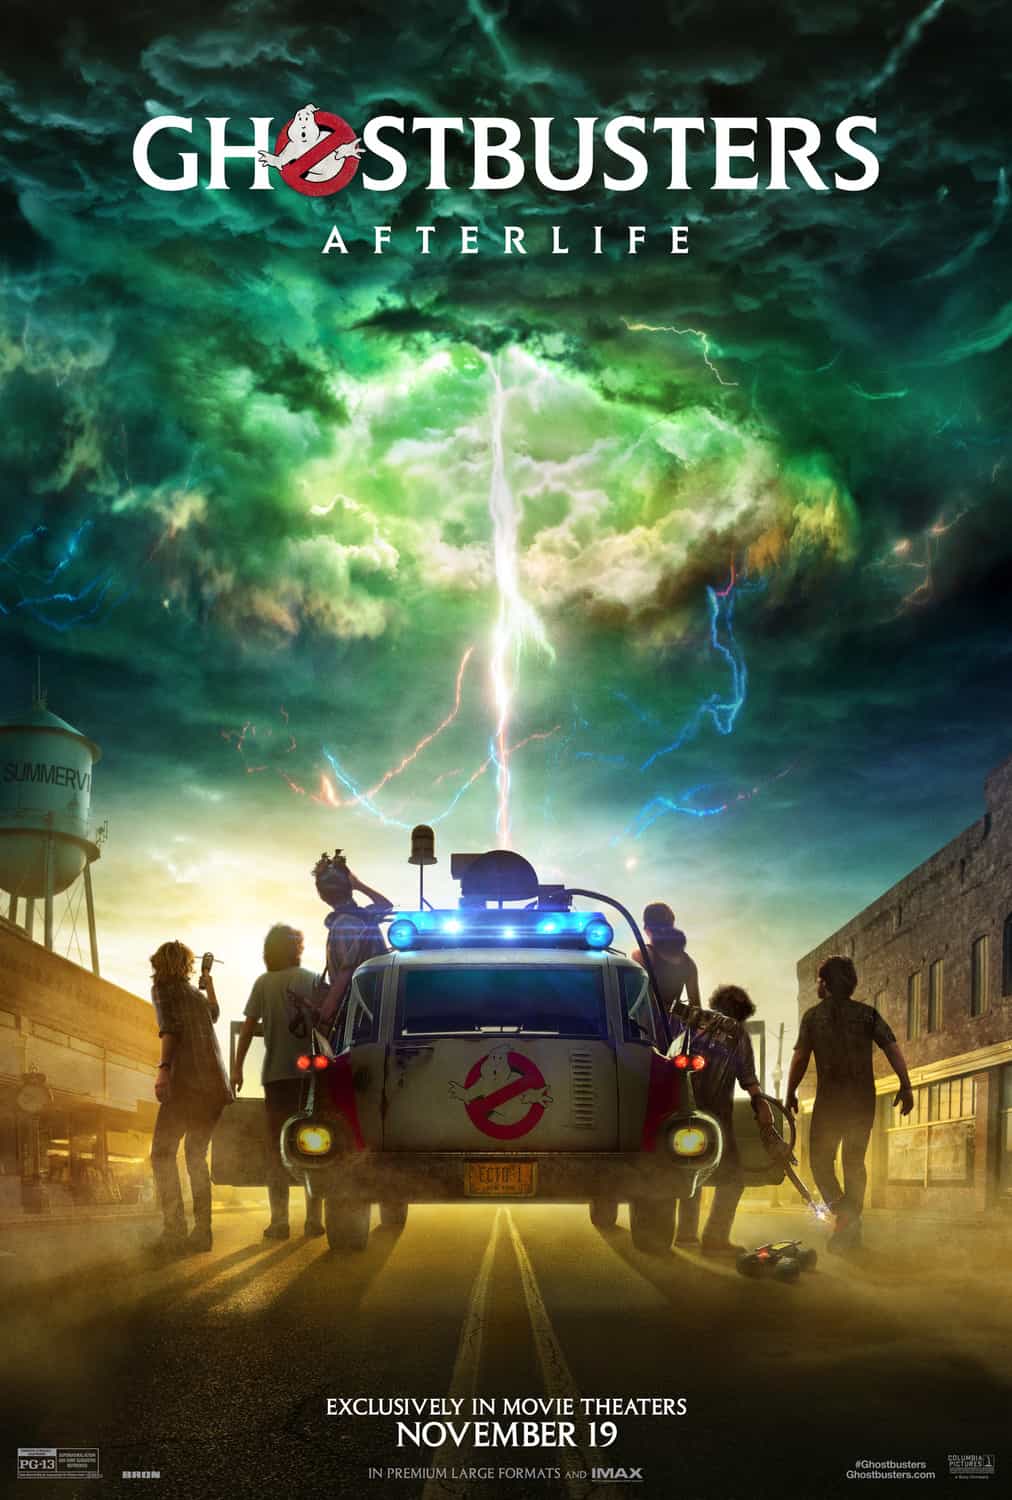 UK Box Office Weekend Report 19th - 21st November 2021:  Ghostbusters: Afterlife makes its UK box office debut at the top